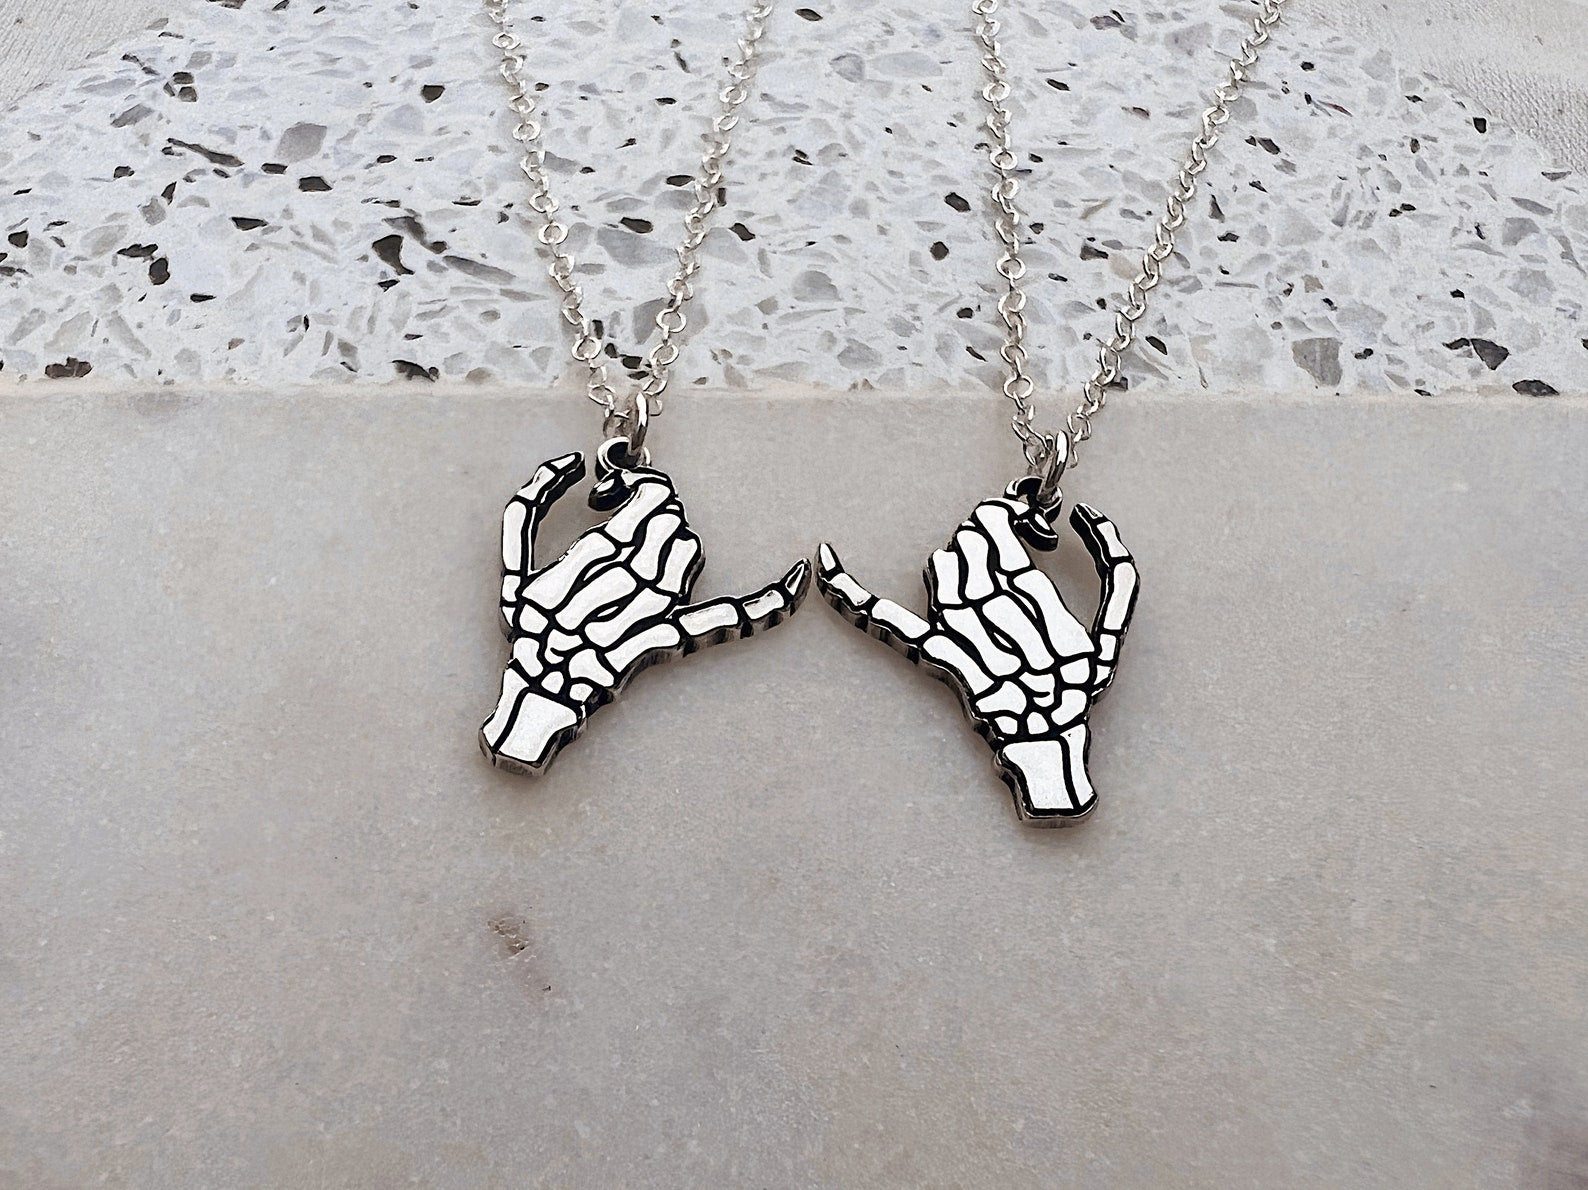 Matching Double Skeleton Pinky Swear Necklace Set